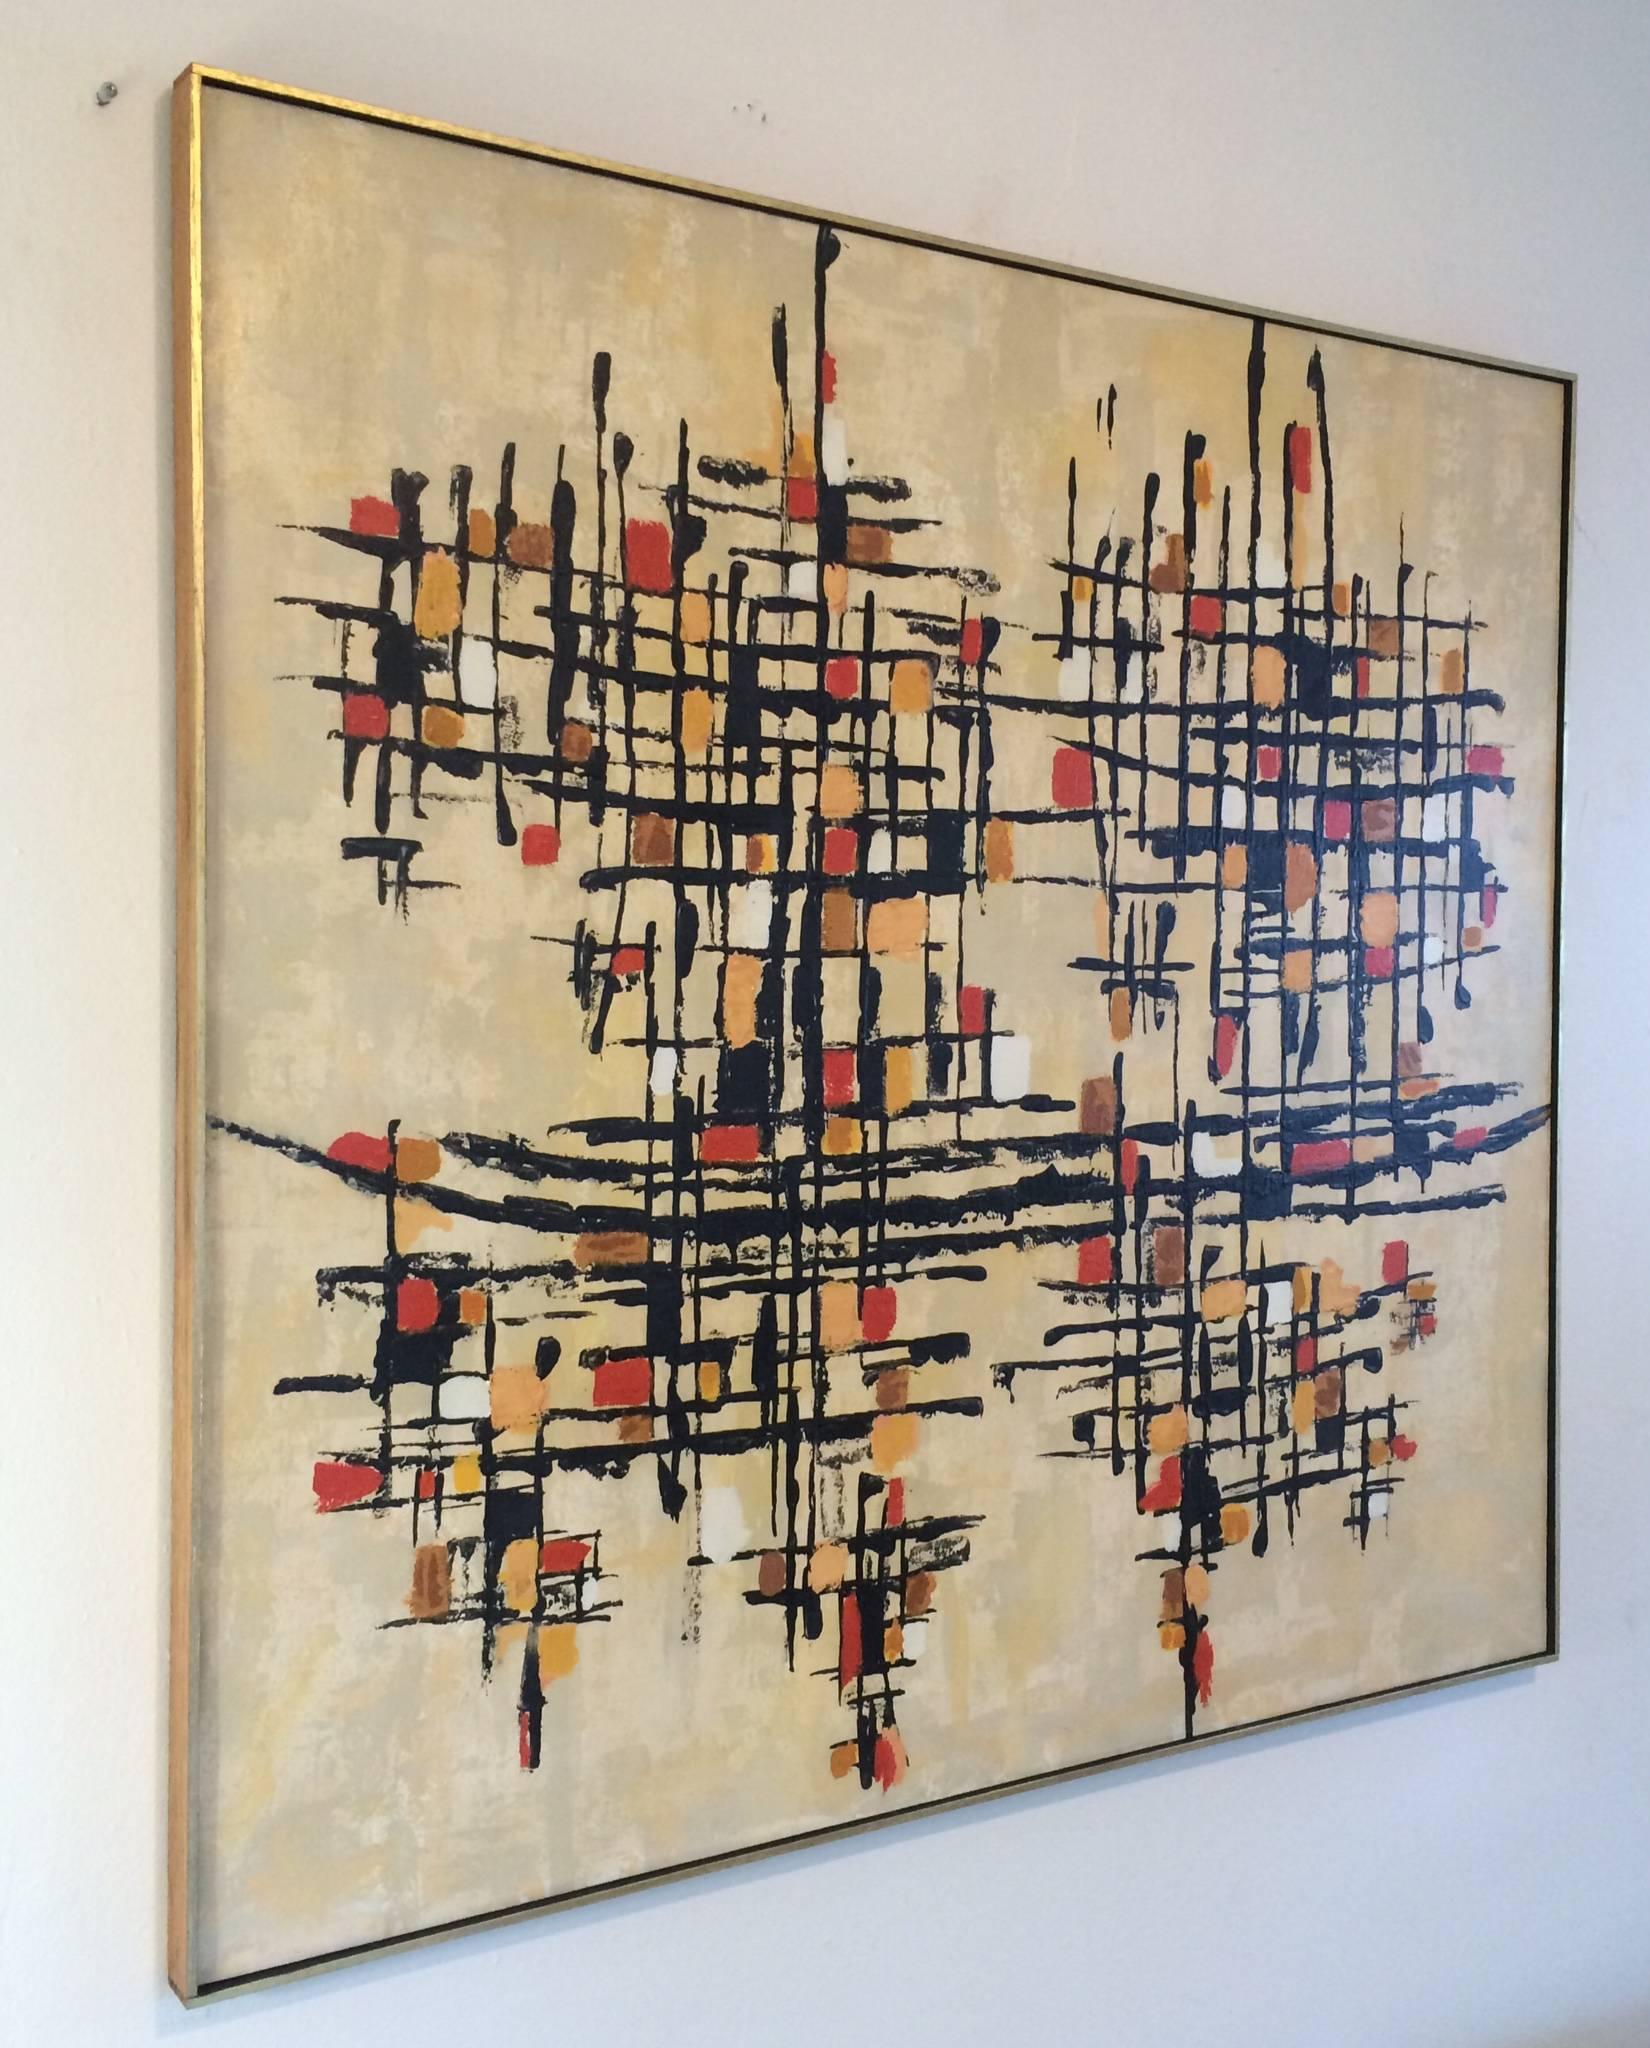 An original acrylic on canvas abstract painting by American artist Tim Mitchell.